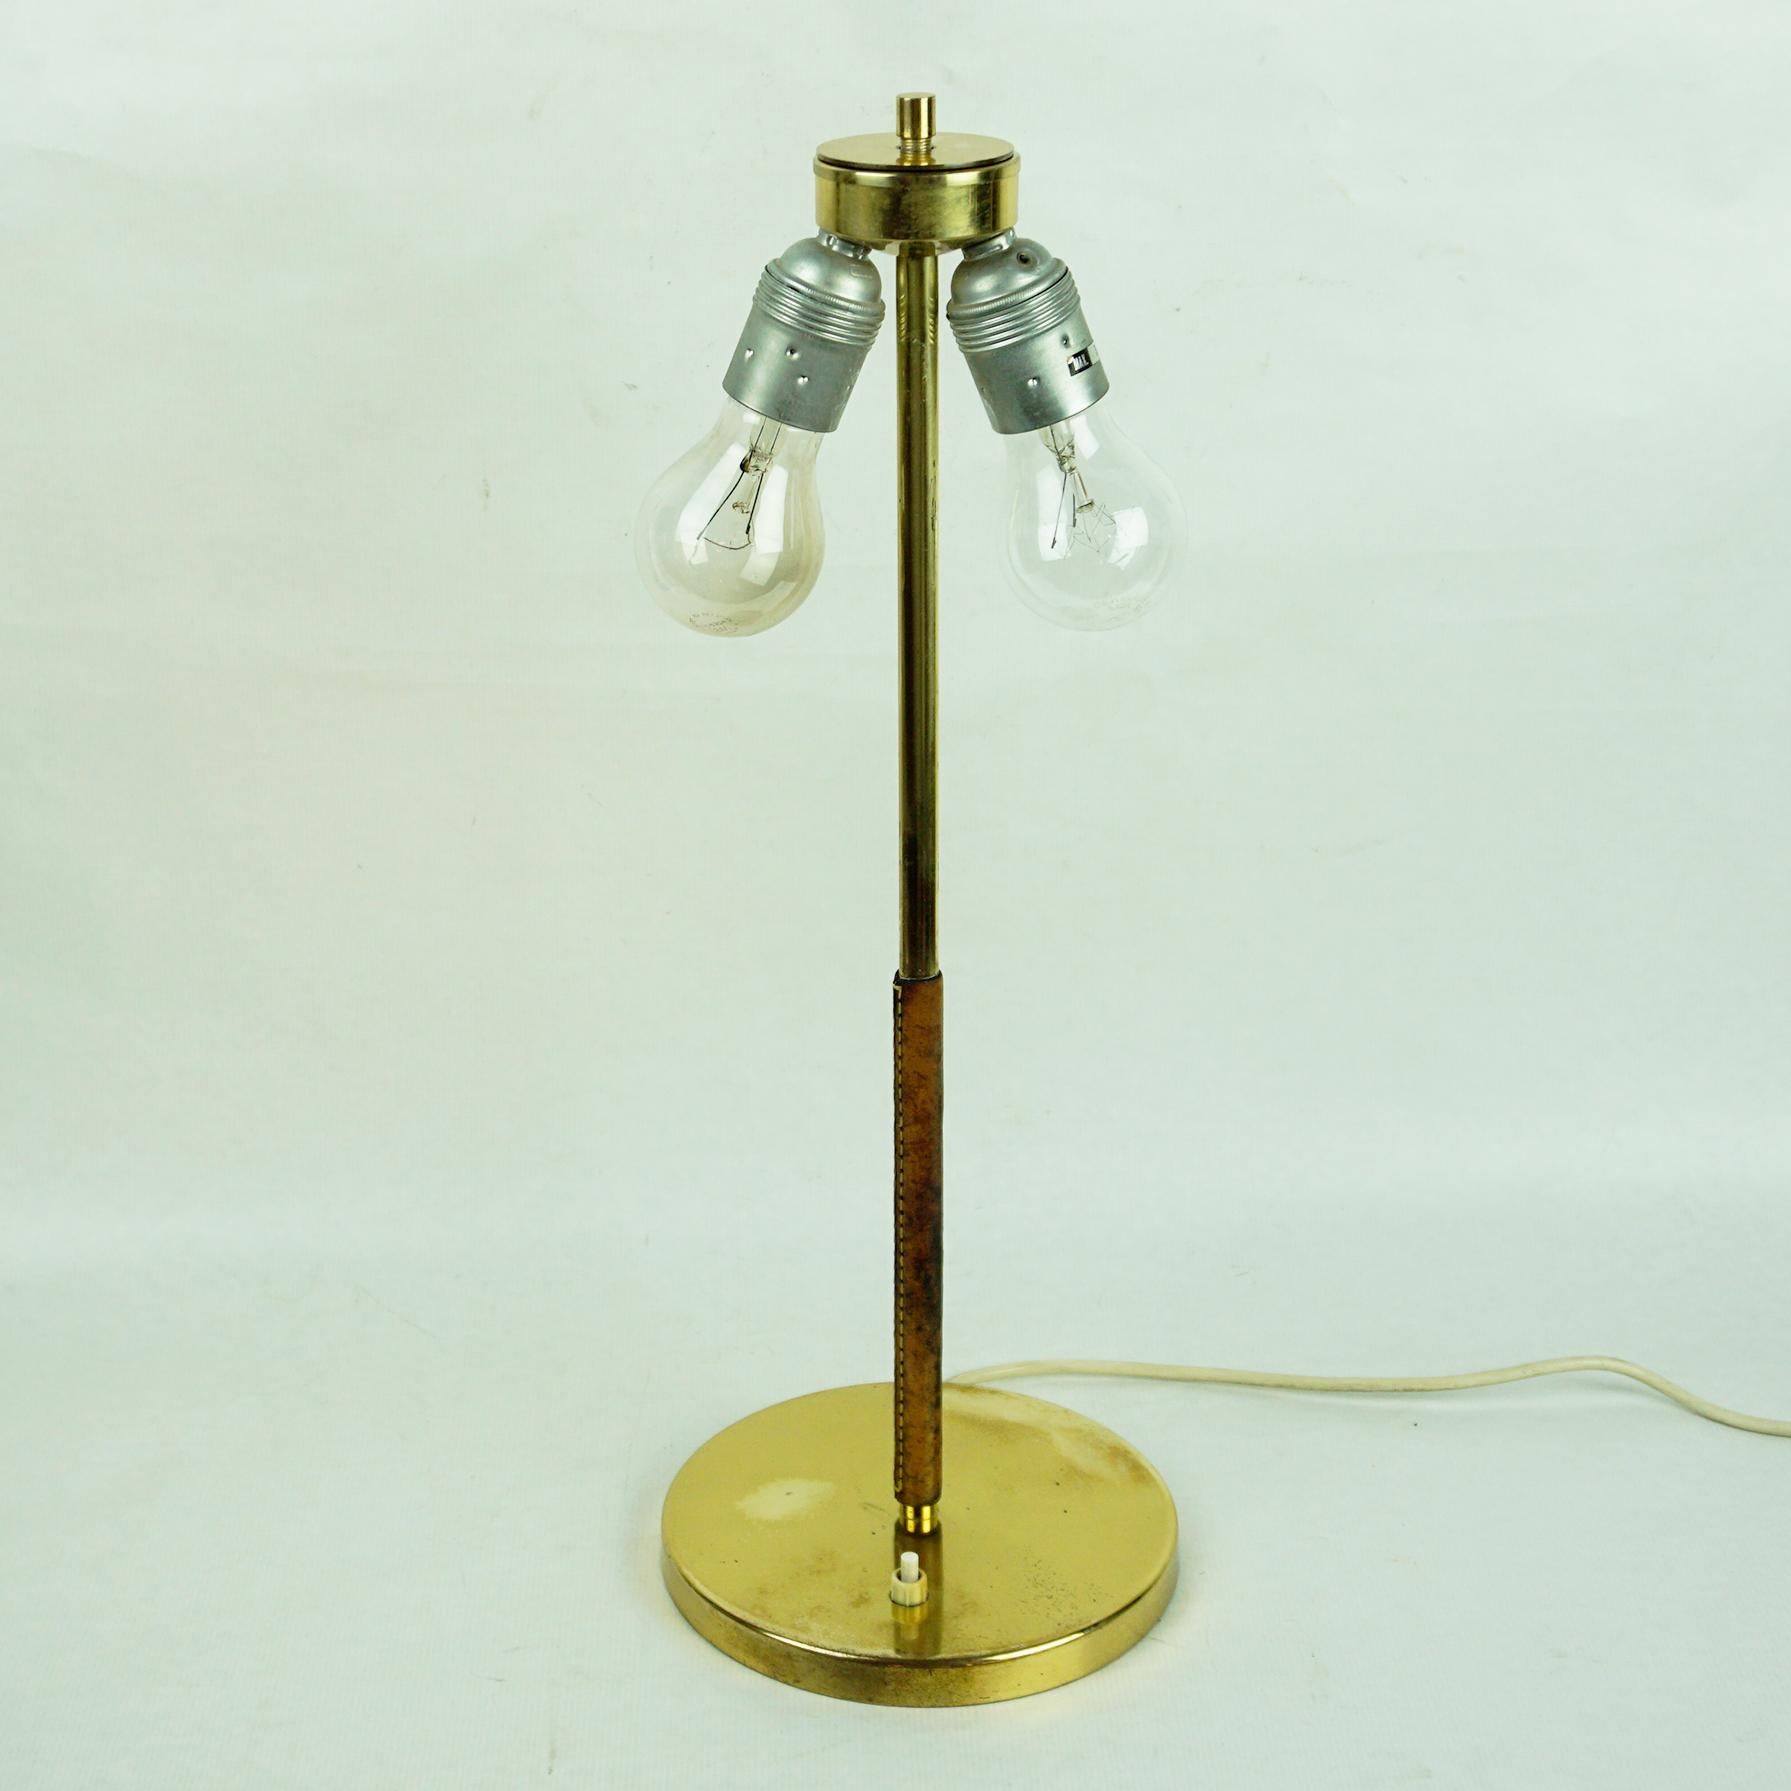 Austrian Midcentury Brass and Leather Table Lamp Mod. 1268 Essen by J. T. Kalmar For Sale 6